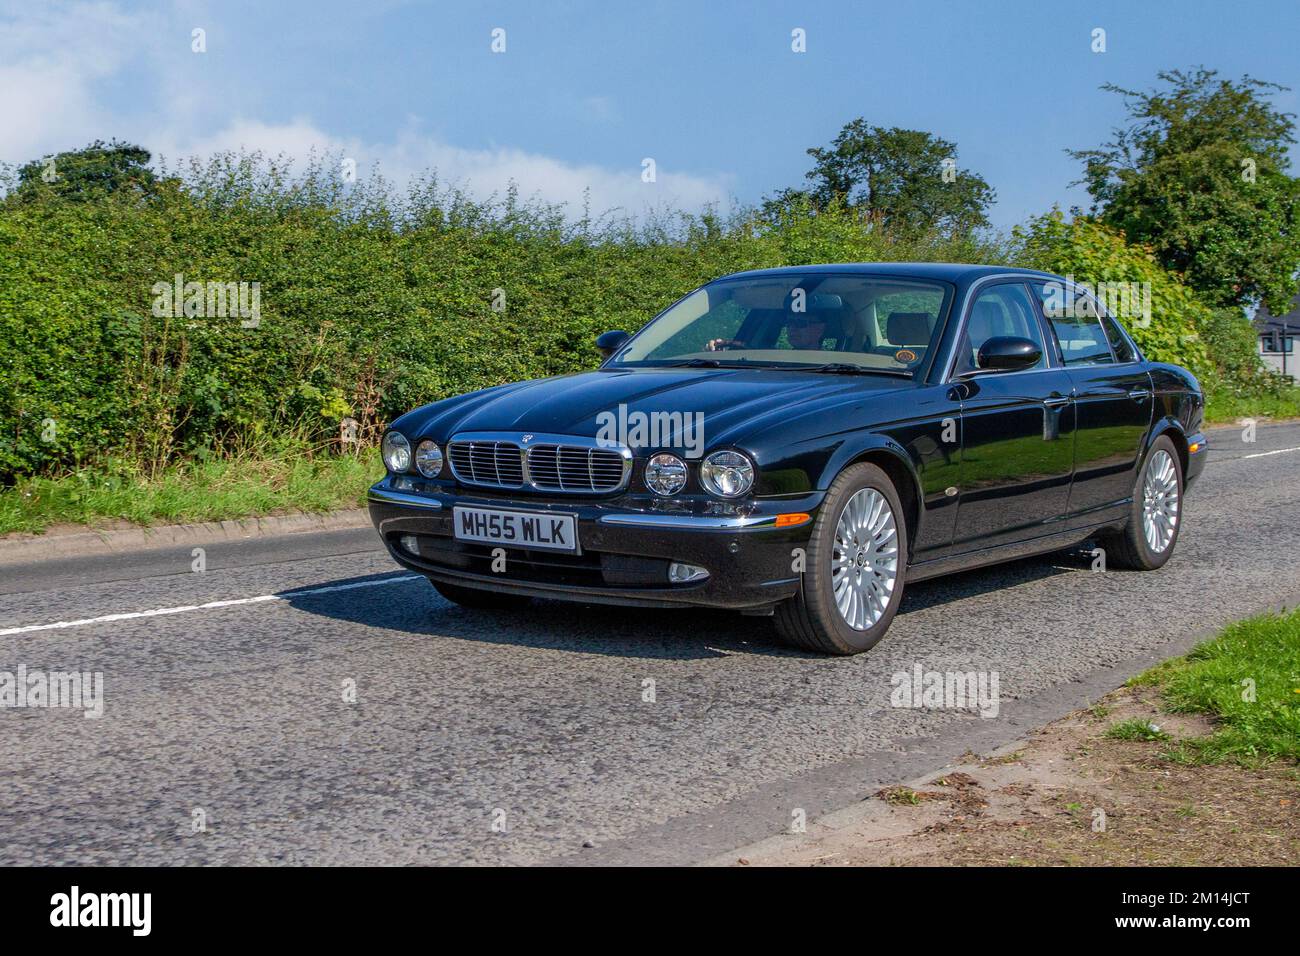 2006 Black Jaguar XJ6 V6 Sovereign Auto; en-route to Capesthorne Hall classic May car show, Cheshire, UK Stock Photo